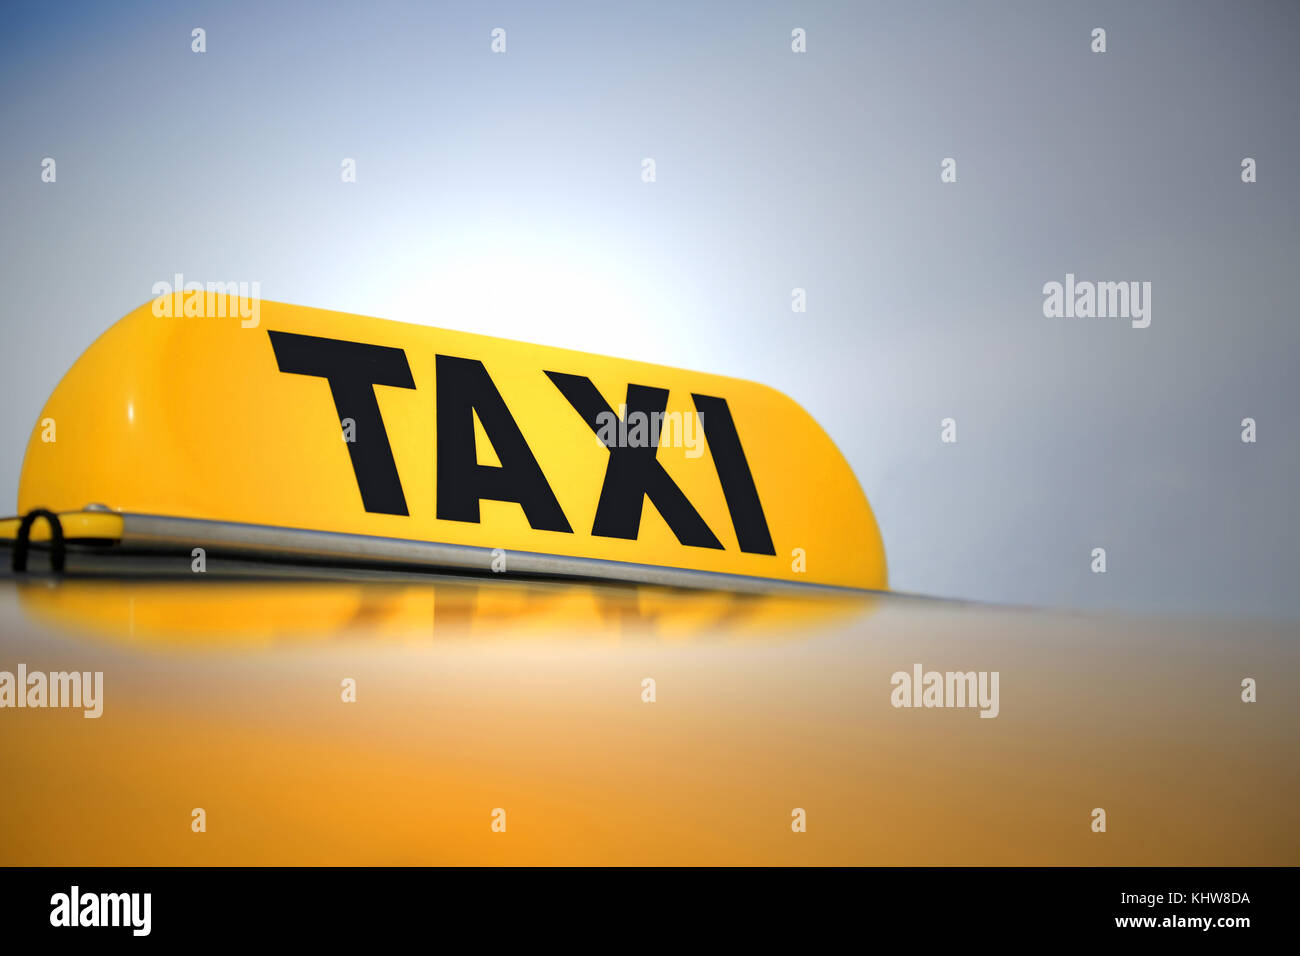 Illuminated Taxi sign on yellow cab. Copy space, shallow depth of field. Stock Photo